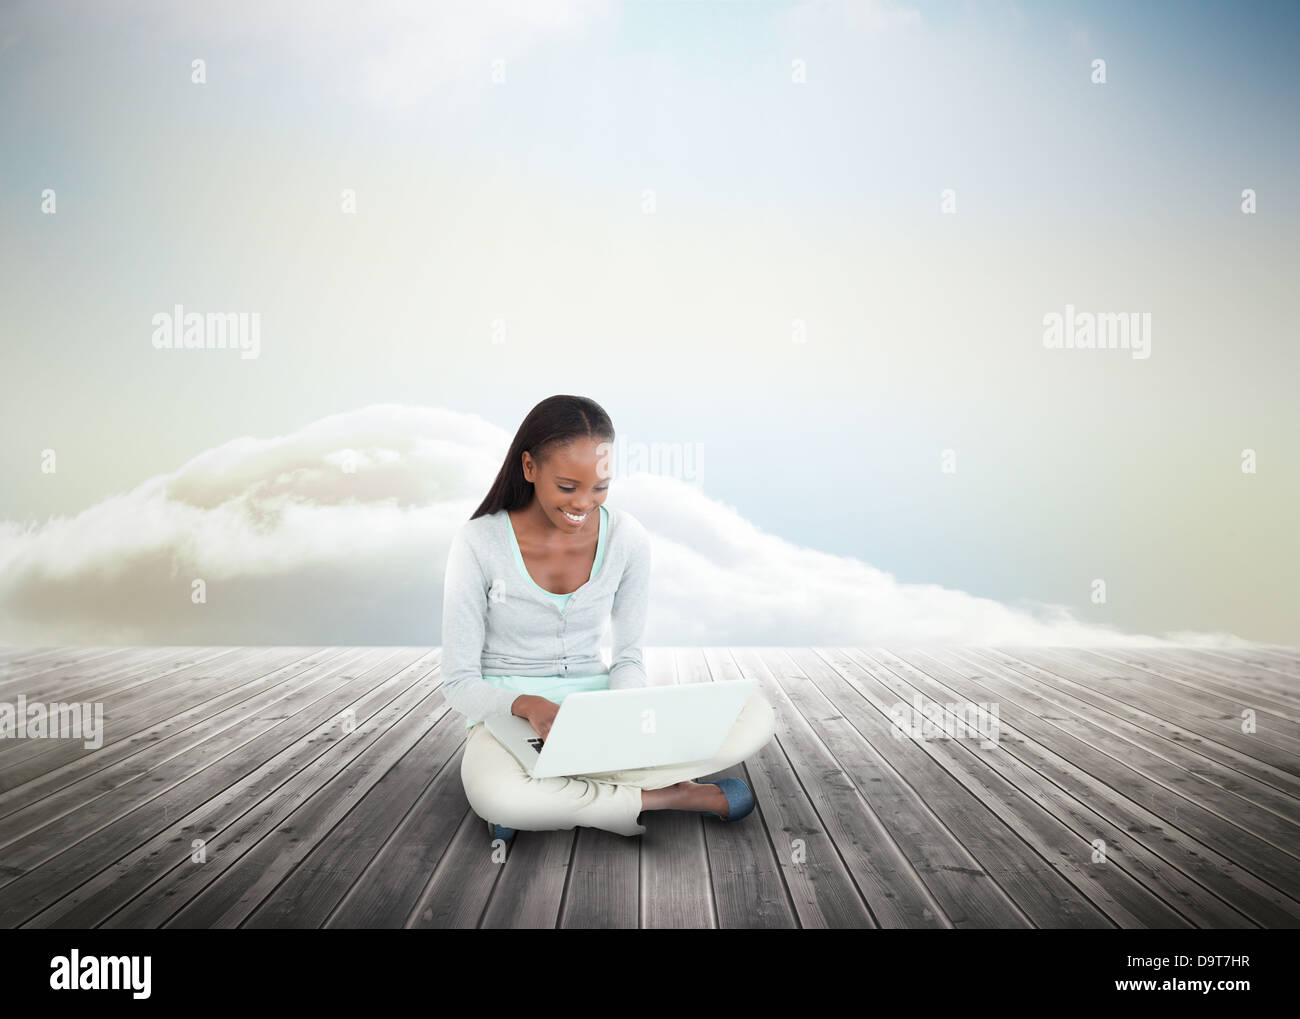 Cute woman using laptop over wooden boards leading out to the horizon Stock Photo